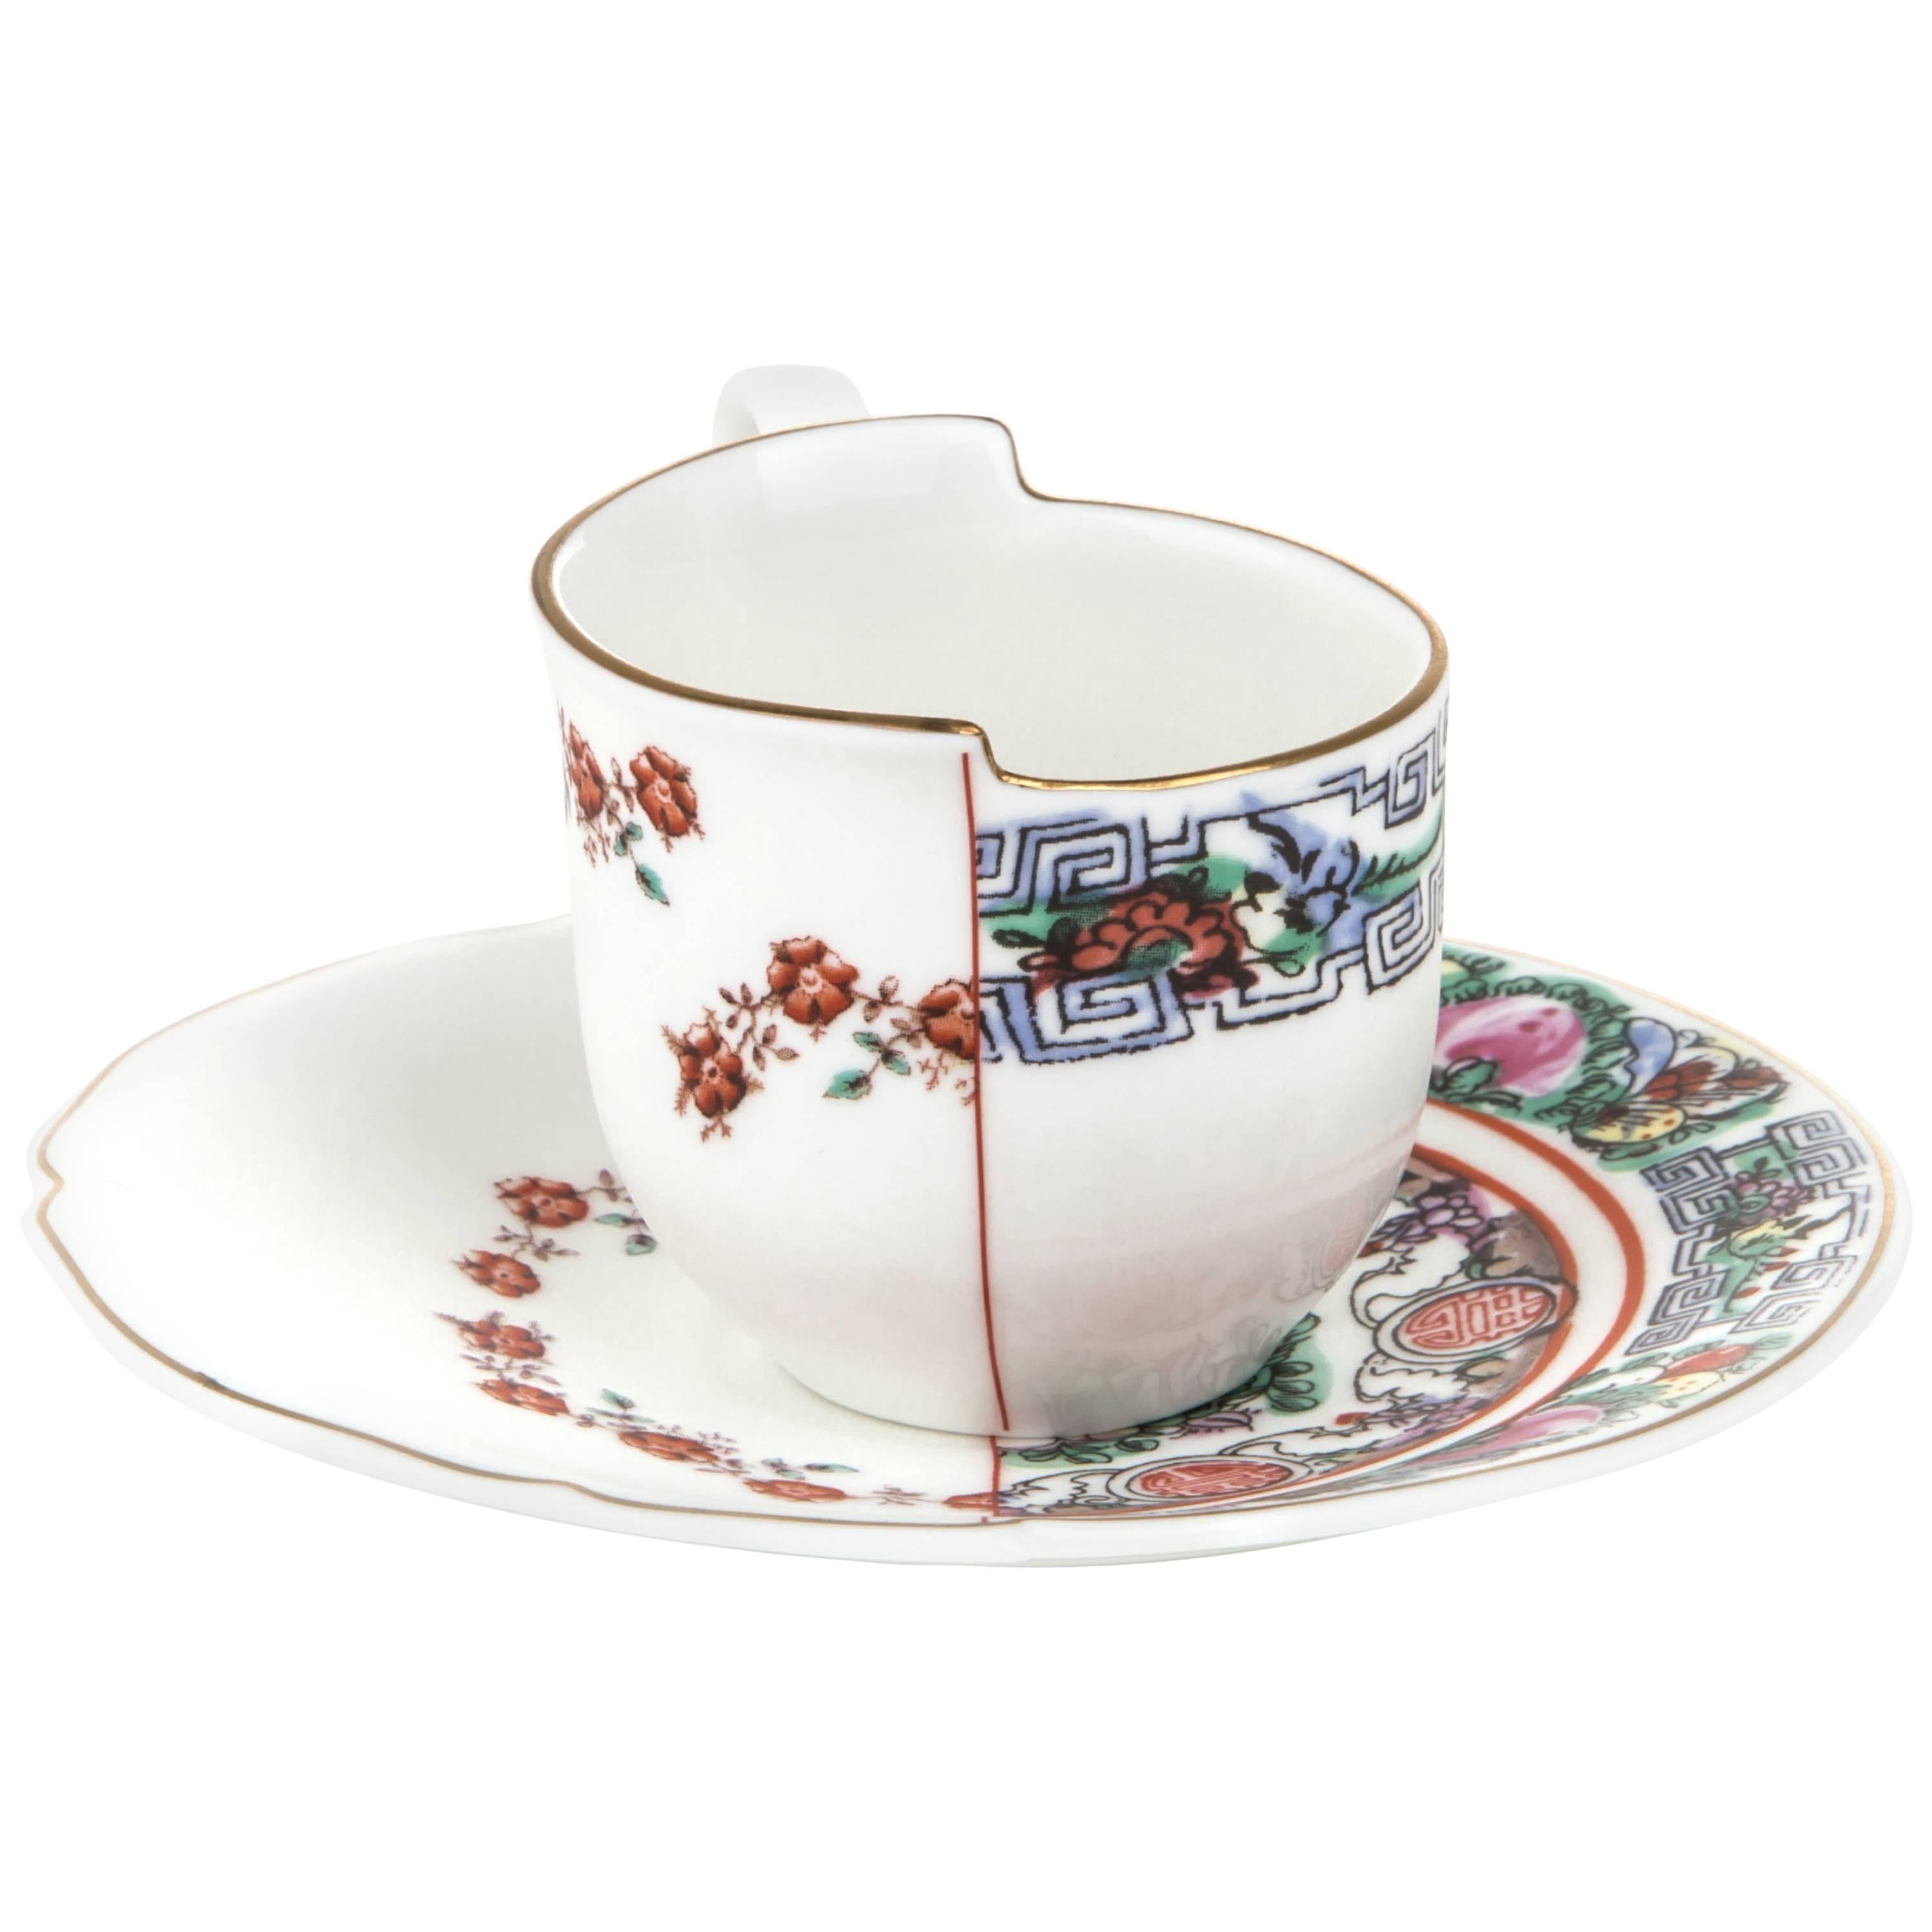 Seletti "Hybrid-Tamara" Coffee Cup with Saucer in Porcelain